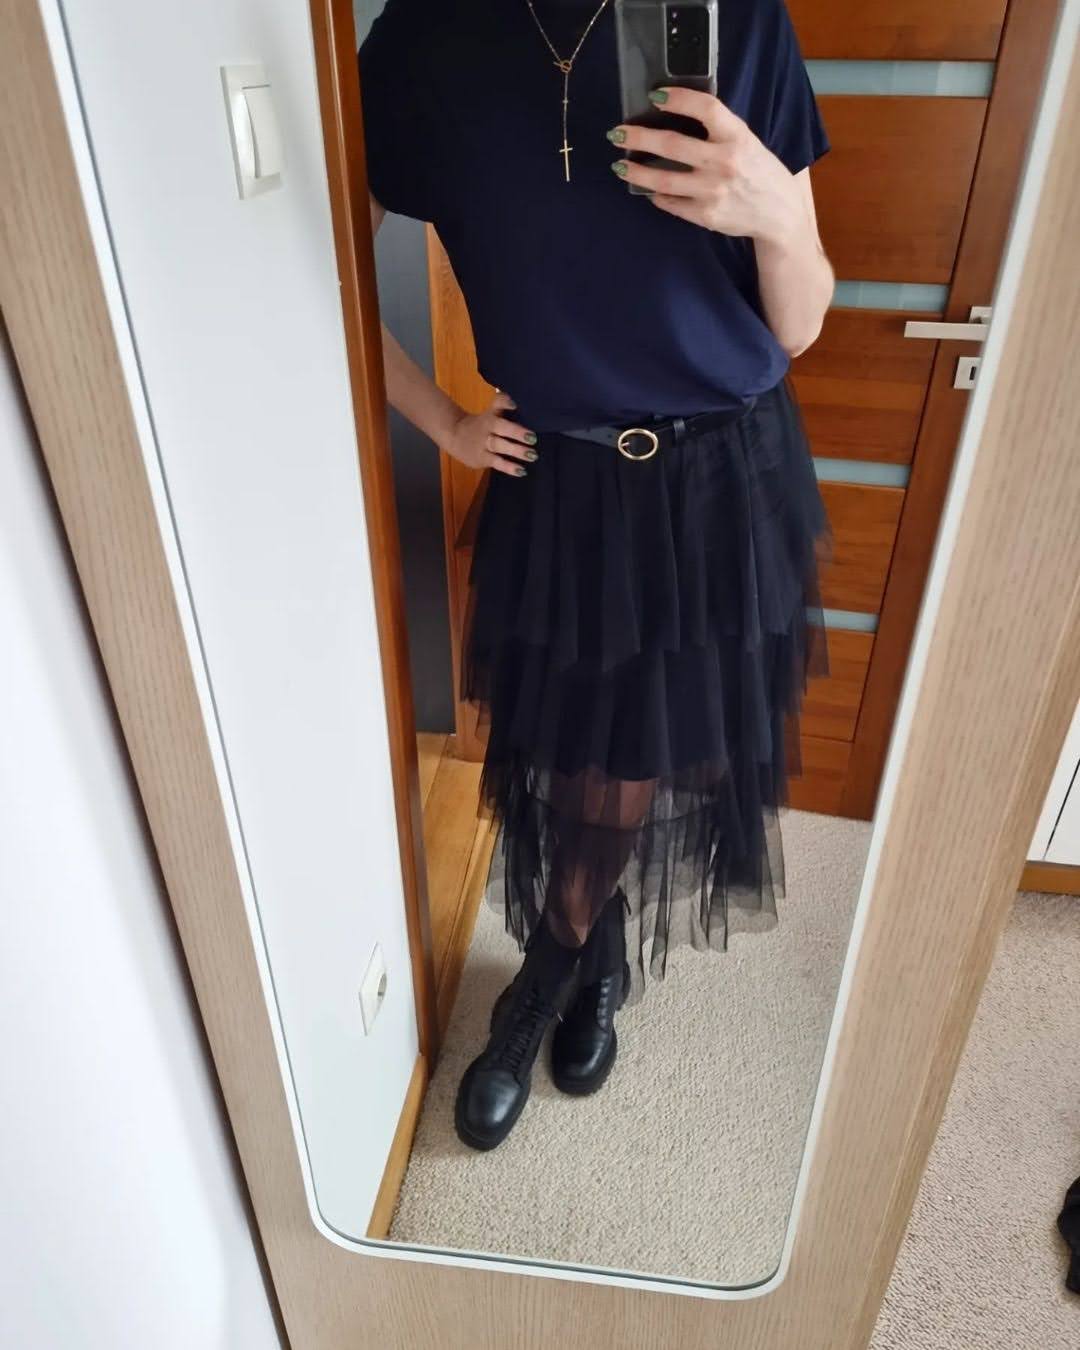 Black and navy outfit8